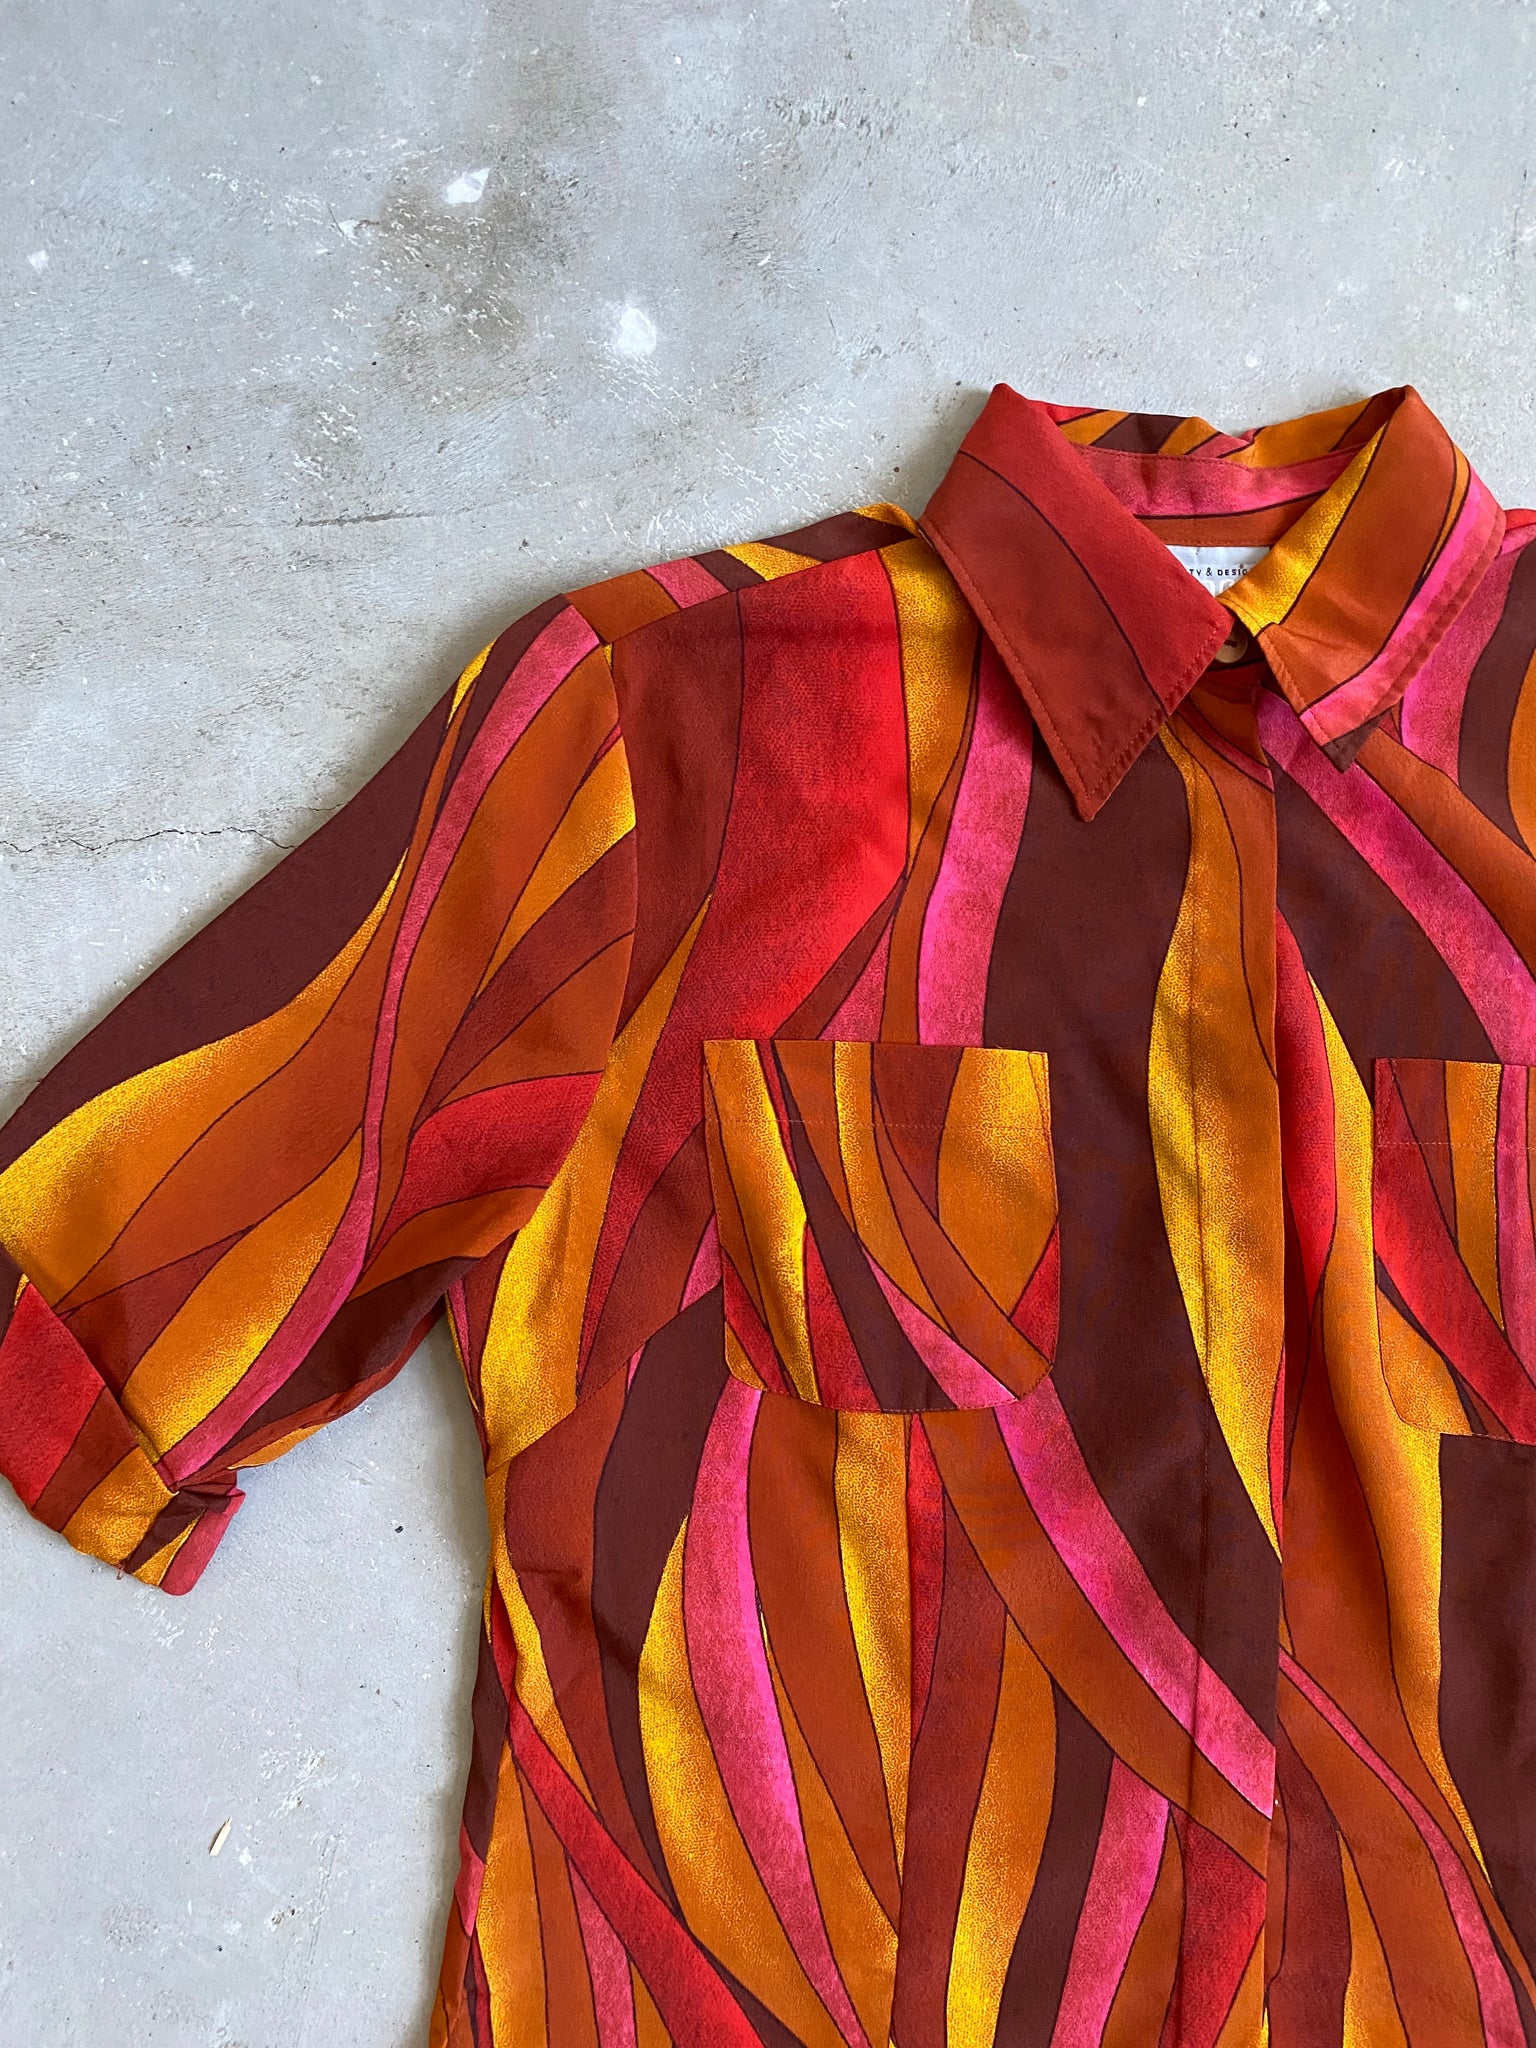 70's Inspired Red, Yellow, and Orange Printed Button Down (M)